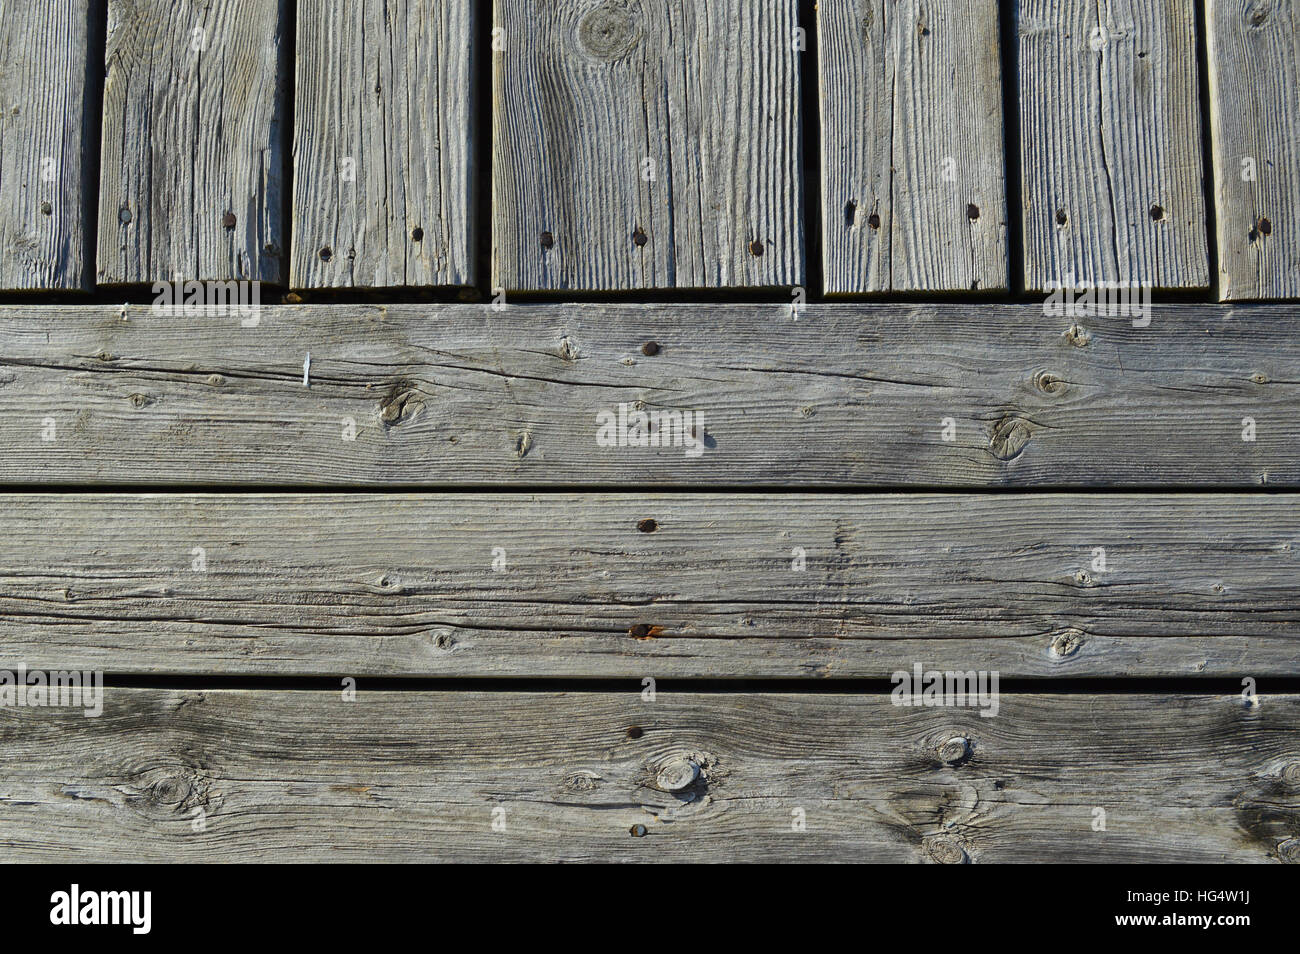 Silvery worn wood planks run both horizontally and vertically as a background with character Stock Photo